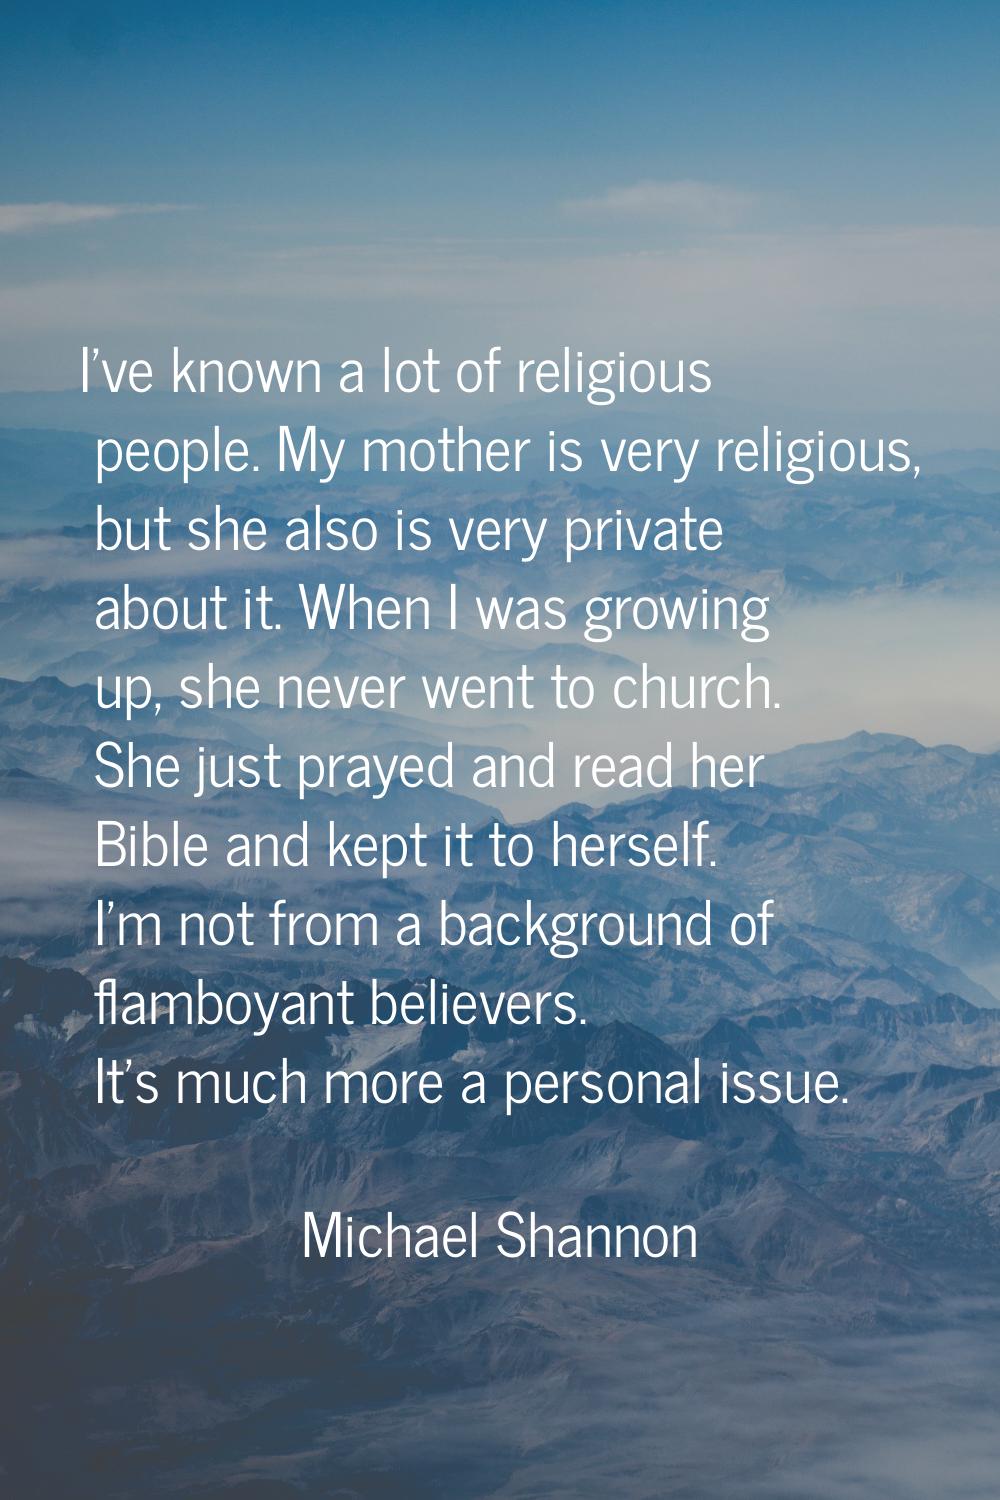 I've known a lot of religious people. My mother is very religious, but she also is very private abo